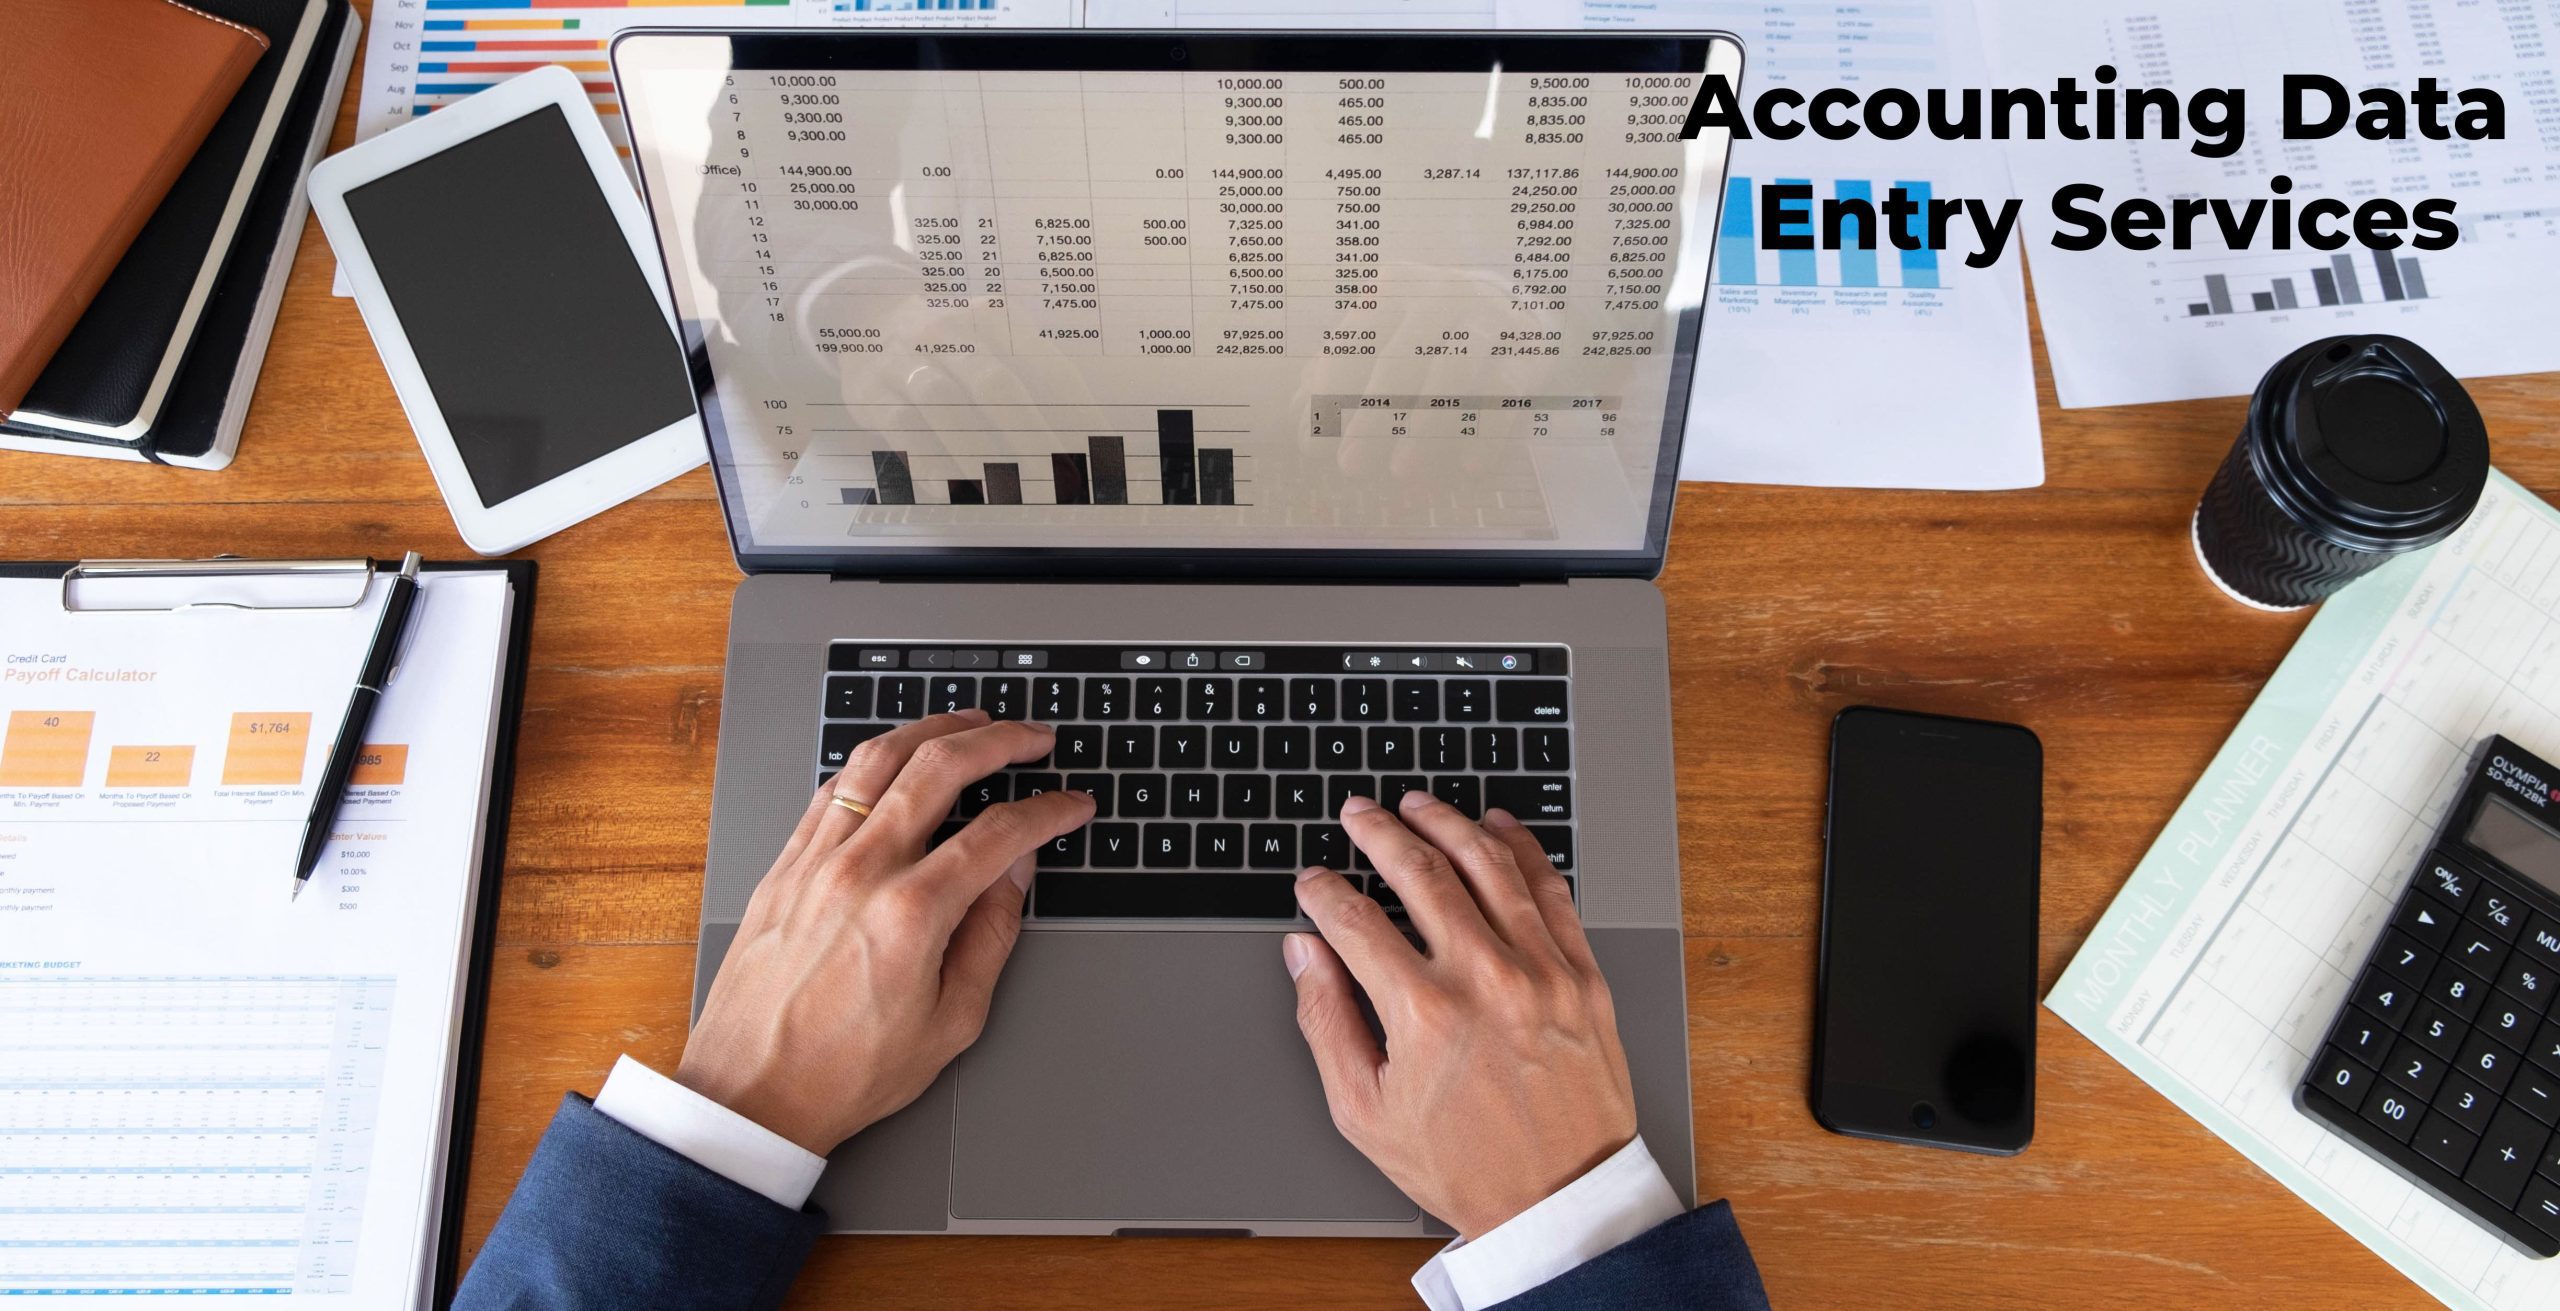 Accounting Data Entry Services